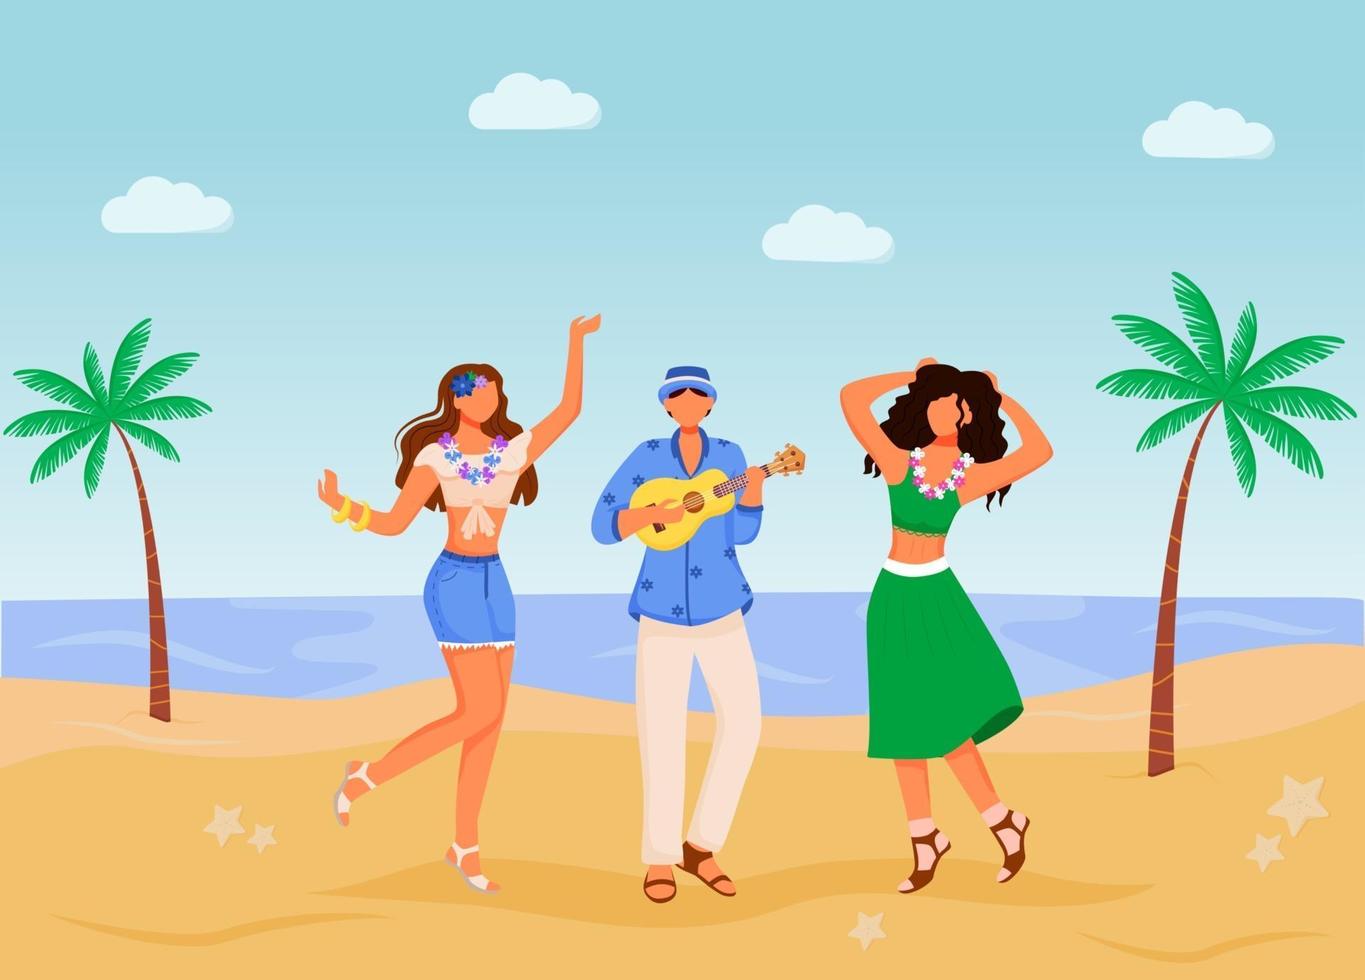 Beach party flat color vector illustration. Females in summer clothing. Ethnic celebration. Standing male playing ukulele 2D cartoon characters with seabeach and palms on background